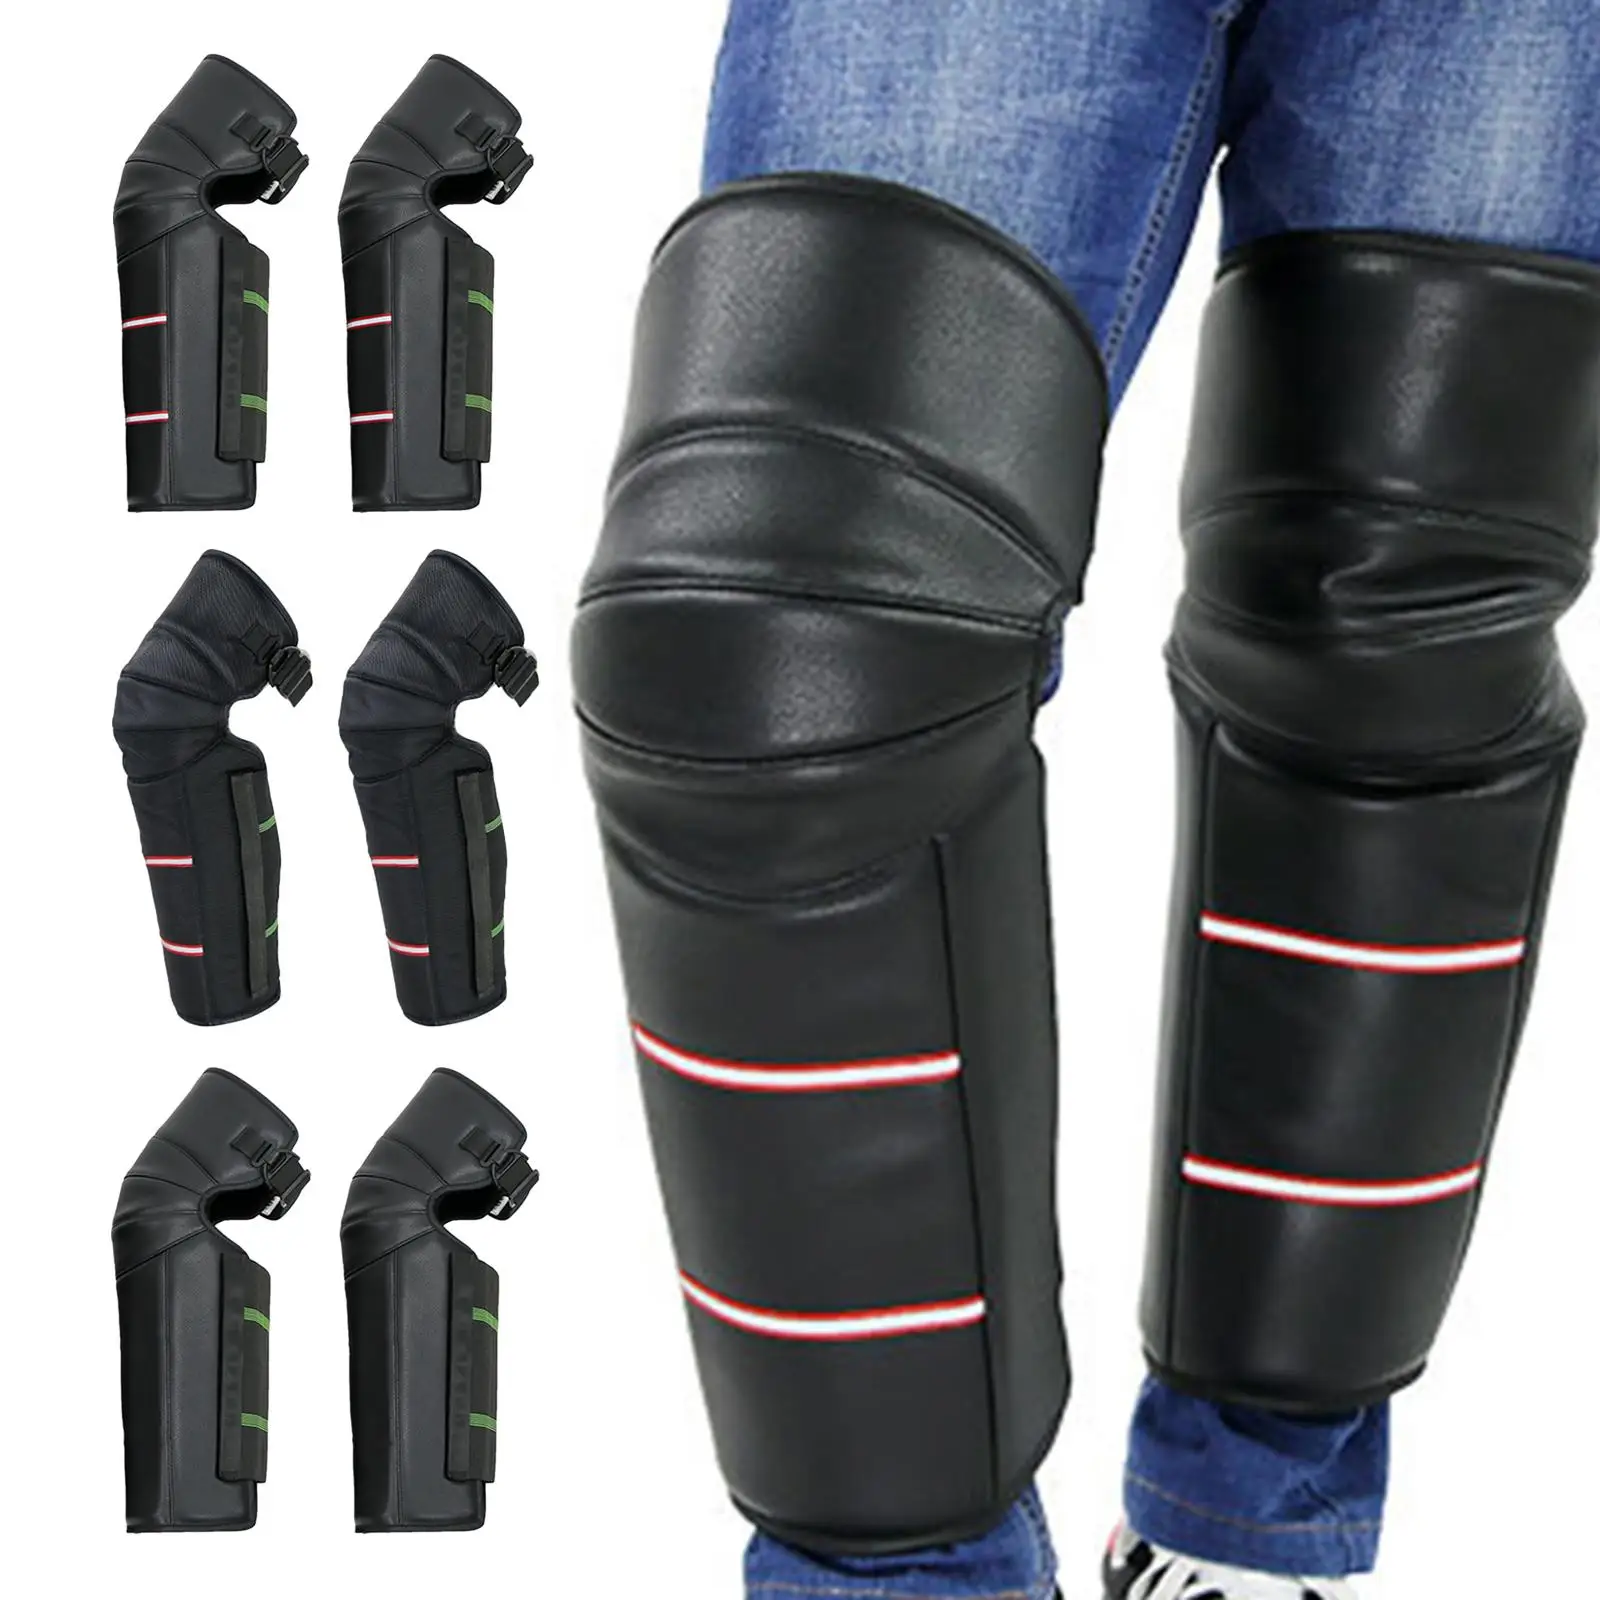 

Motorcycle Knee Pads Leggings Covers for Hiking Winter Ski Camping Full Protective Chaps for Motorcycle Bike Knee Brace Guards